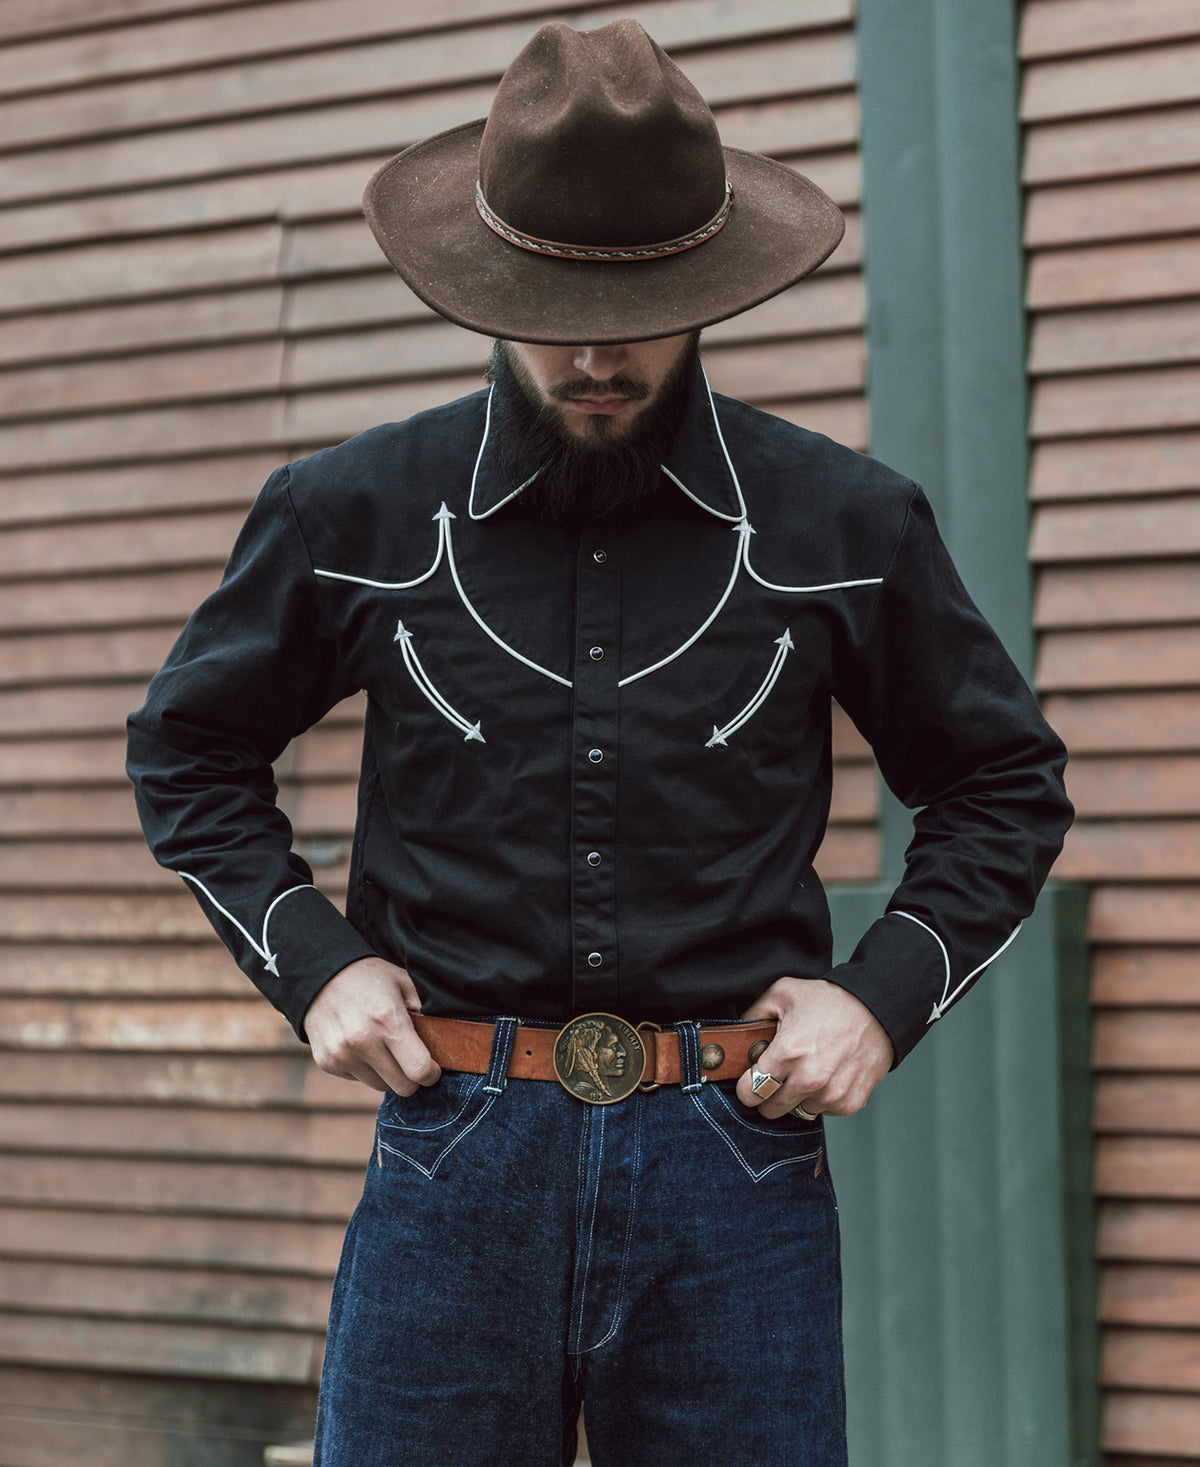 Old Time Western Shirt